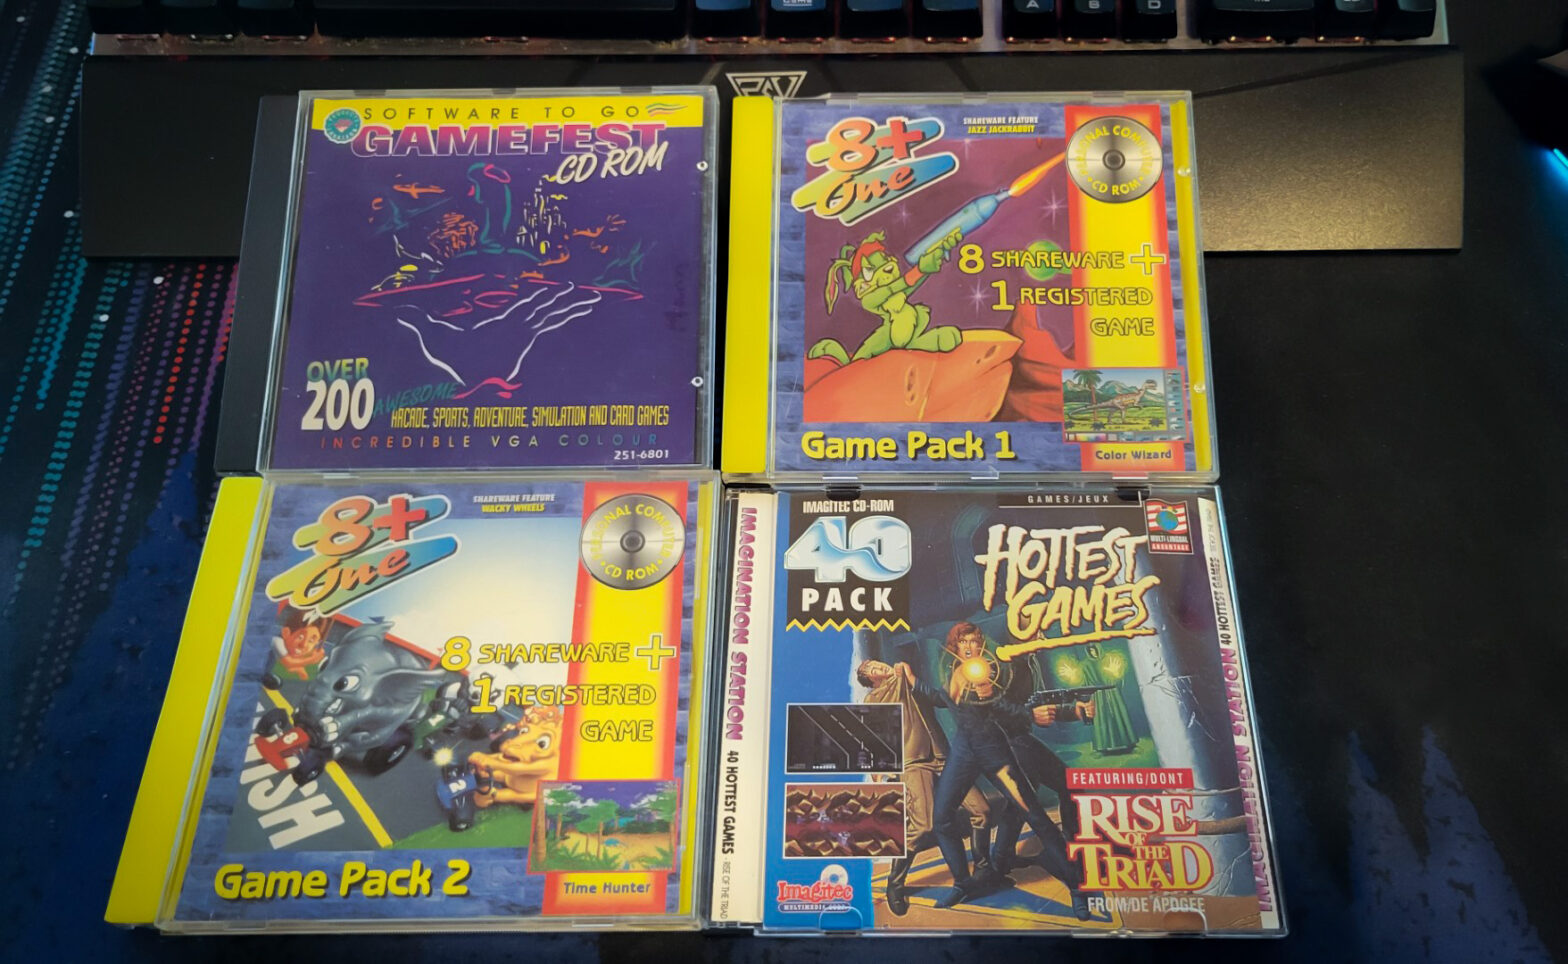 the 4 shareware disks I owned as a kid and still have kicking around